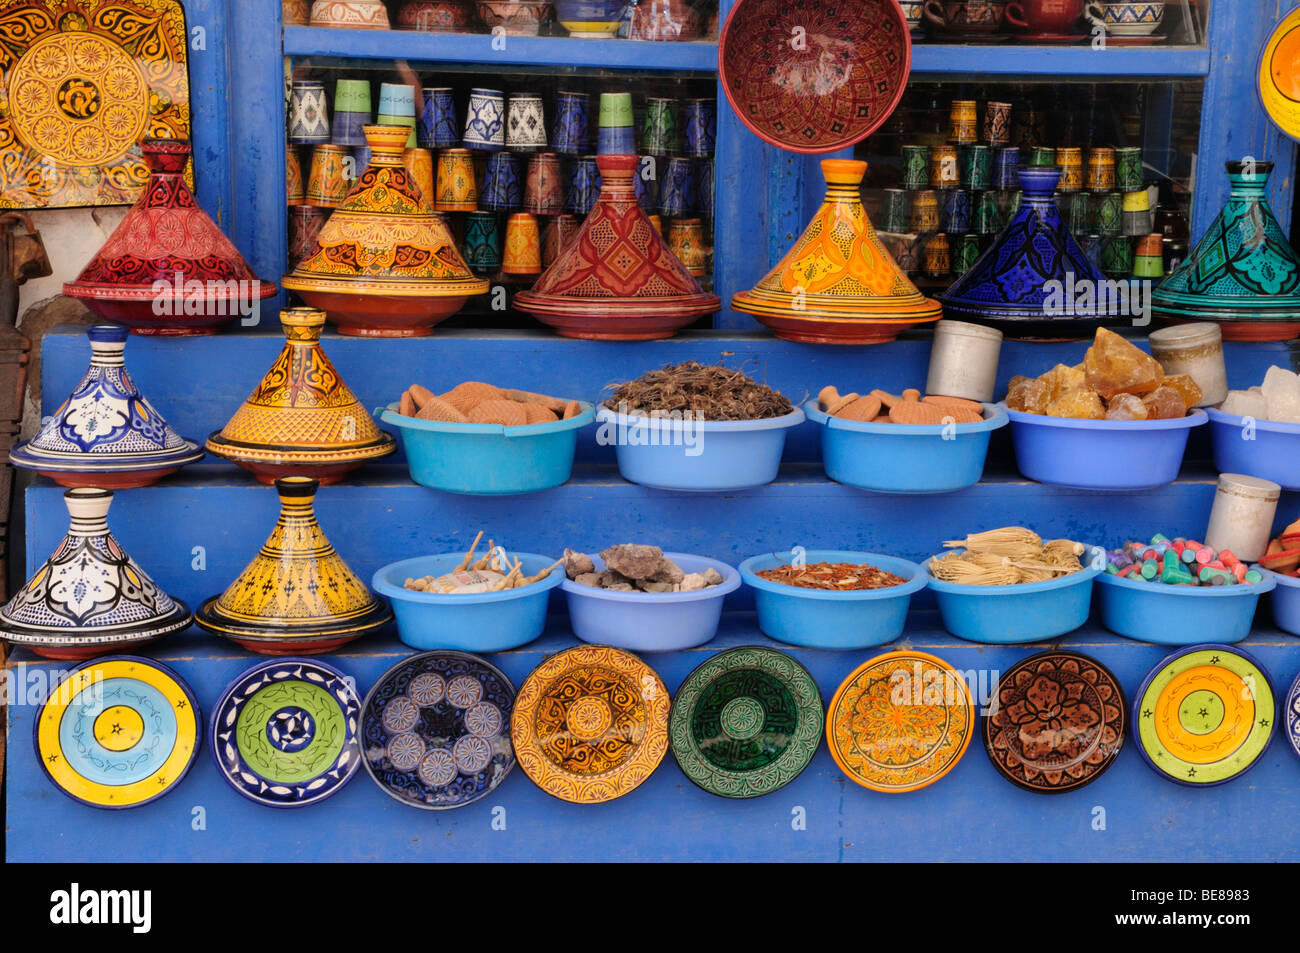 Ceramics and Spices for sale in Essaouira, Morocco Stock Photo